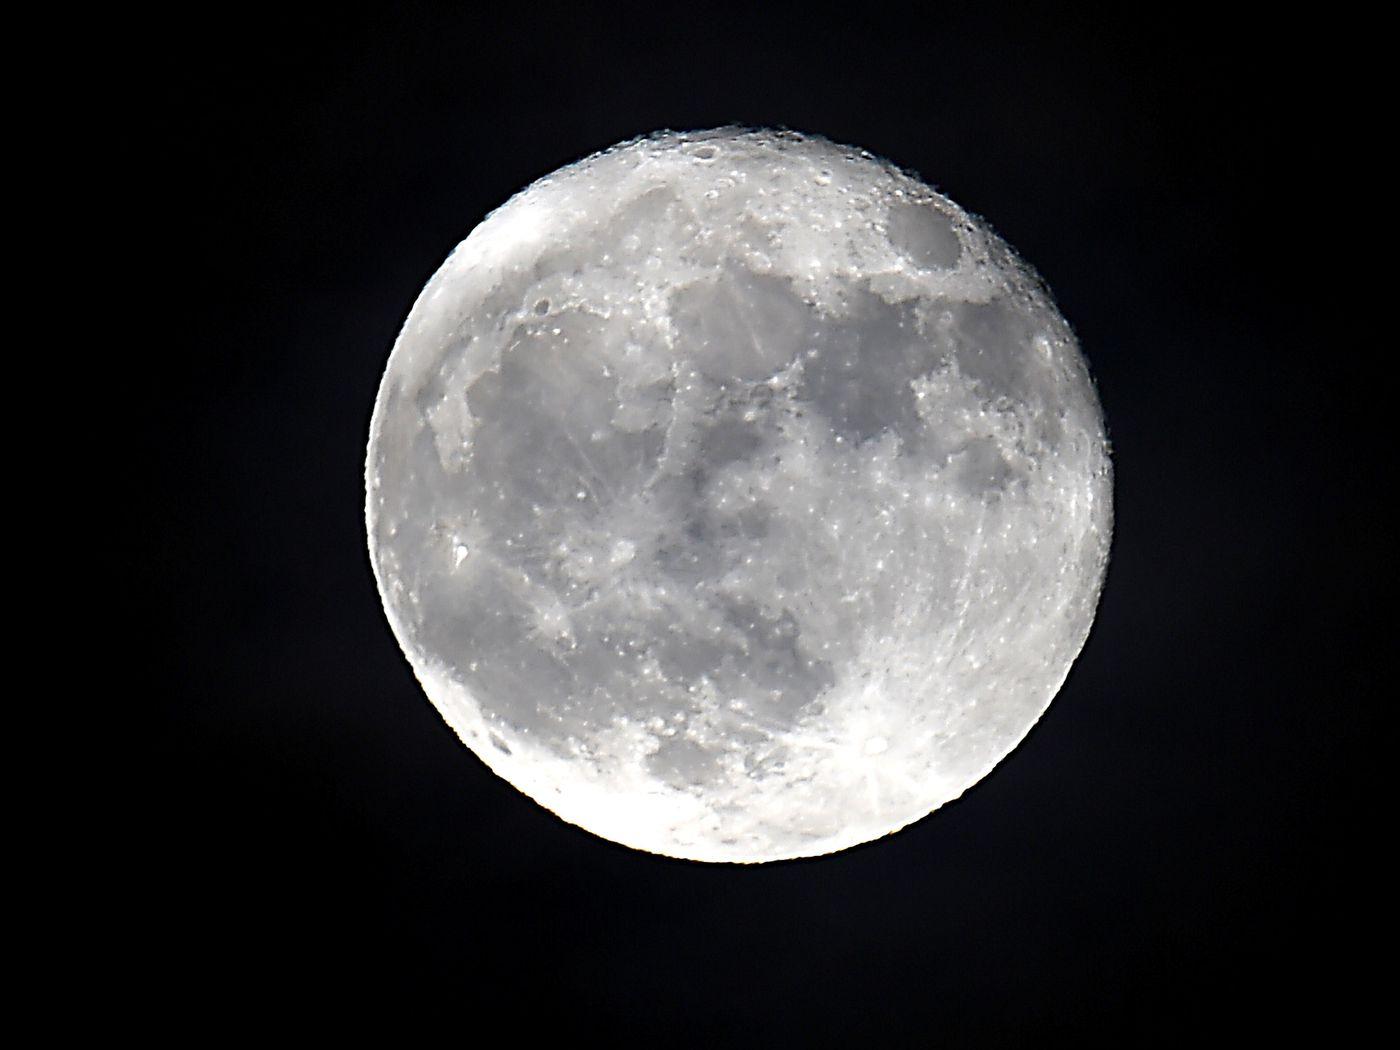 Tonight's supermoon will be the largest since 1948